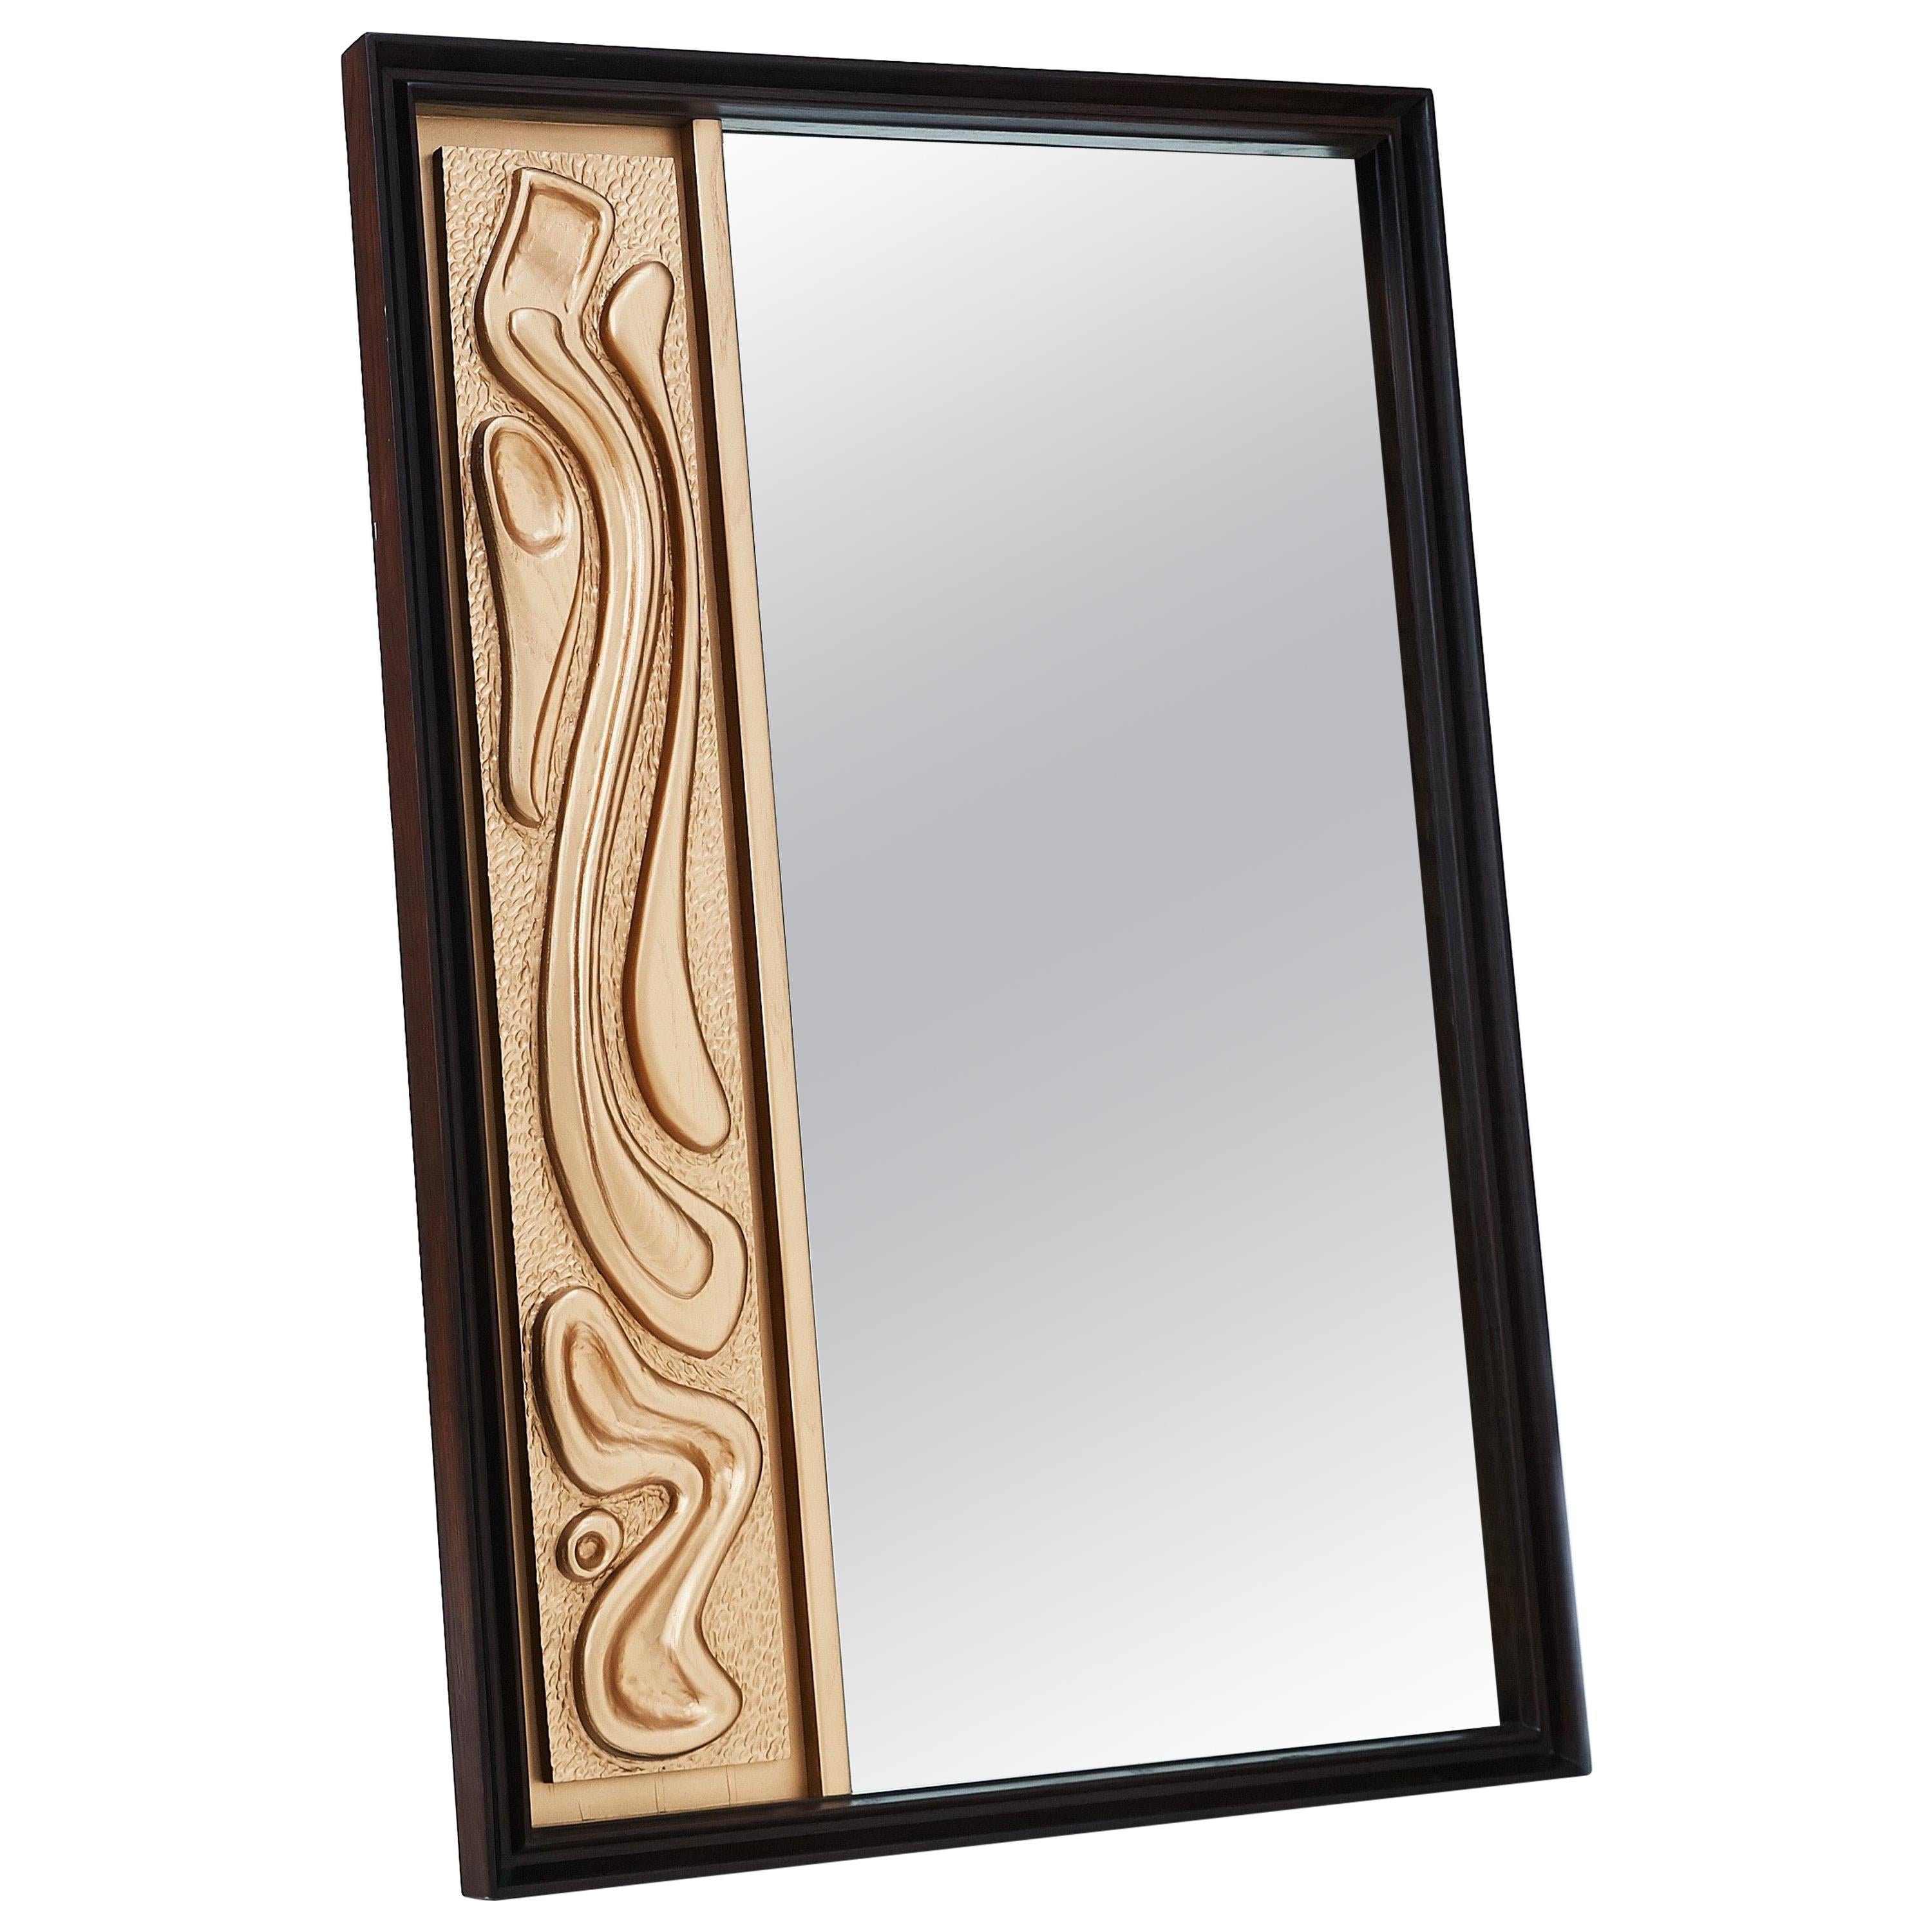 Oceanic Mad Men Style Wall Mirror by Pulaski